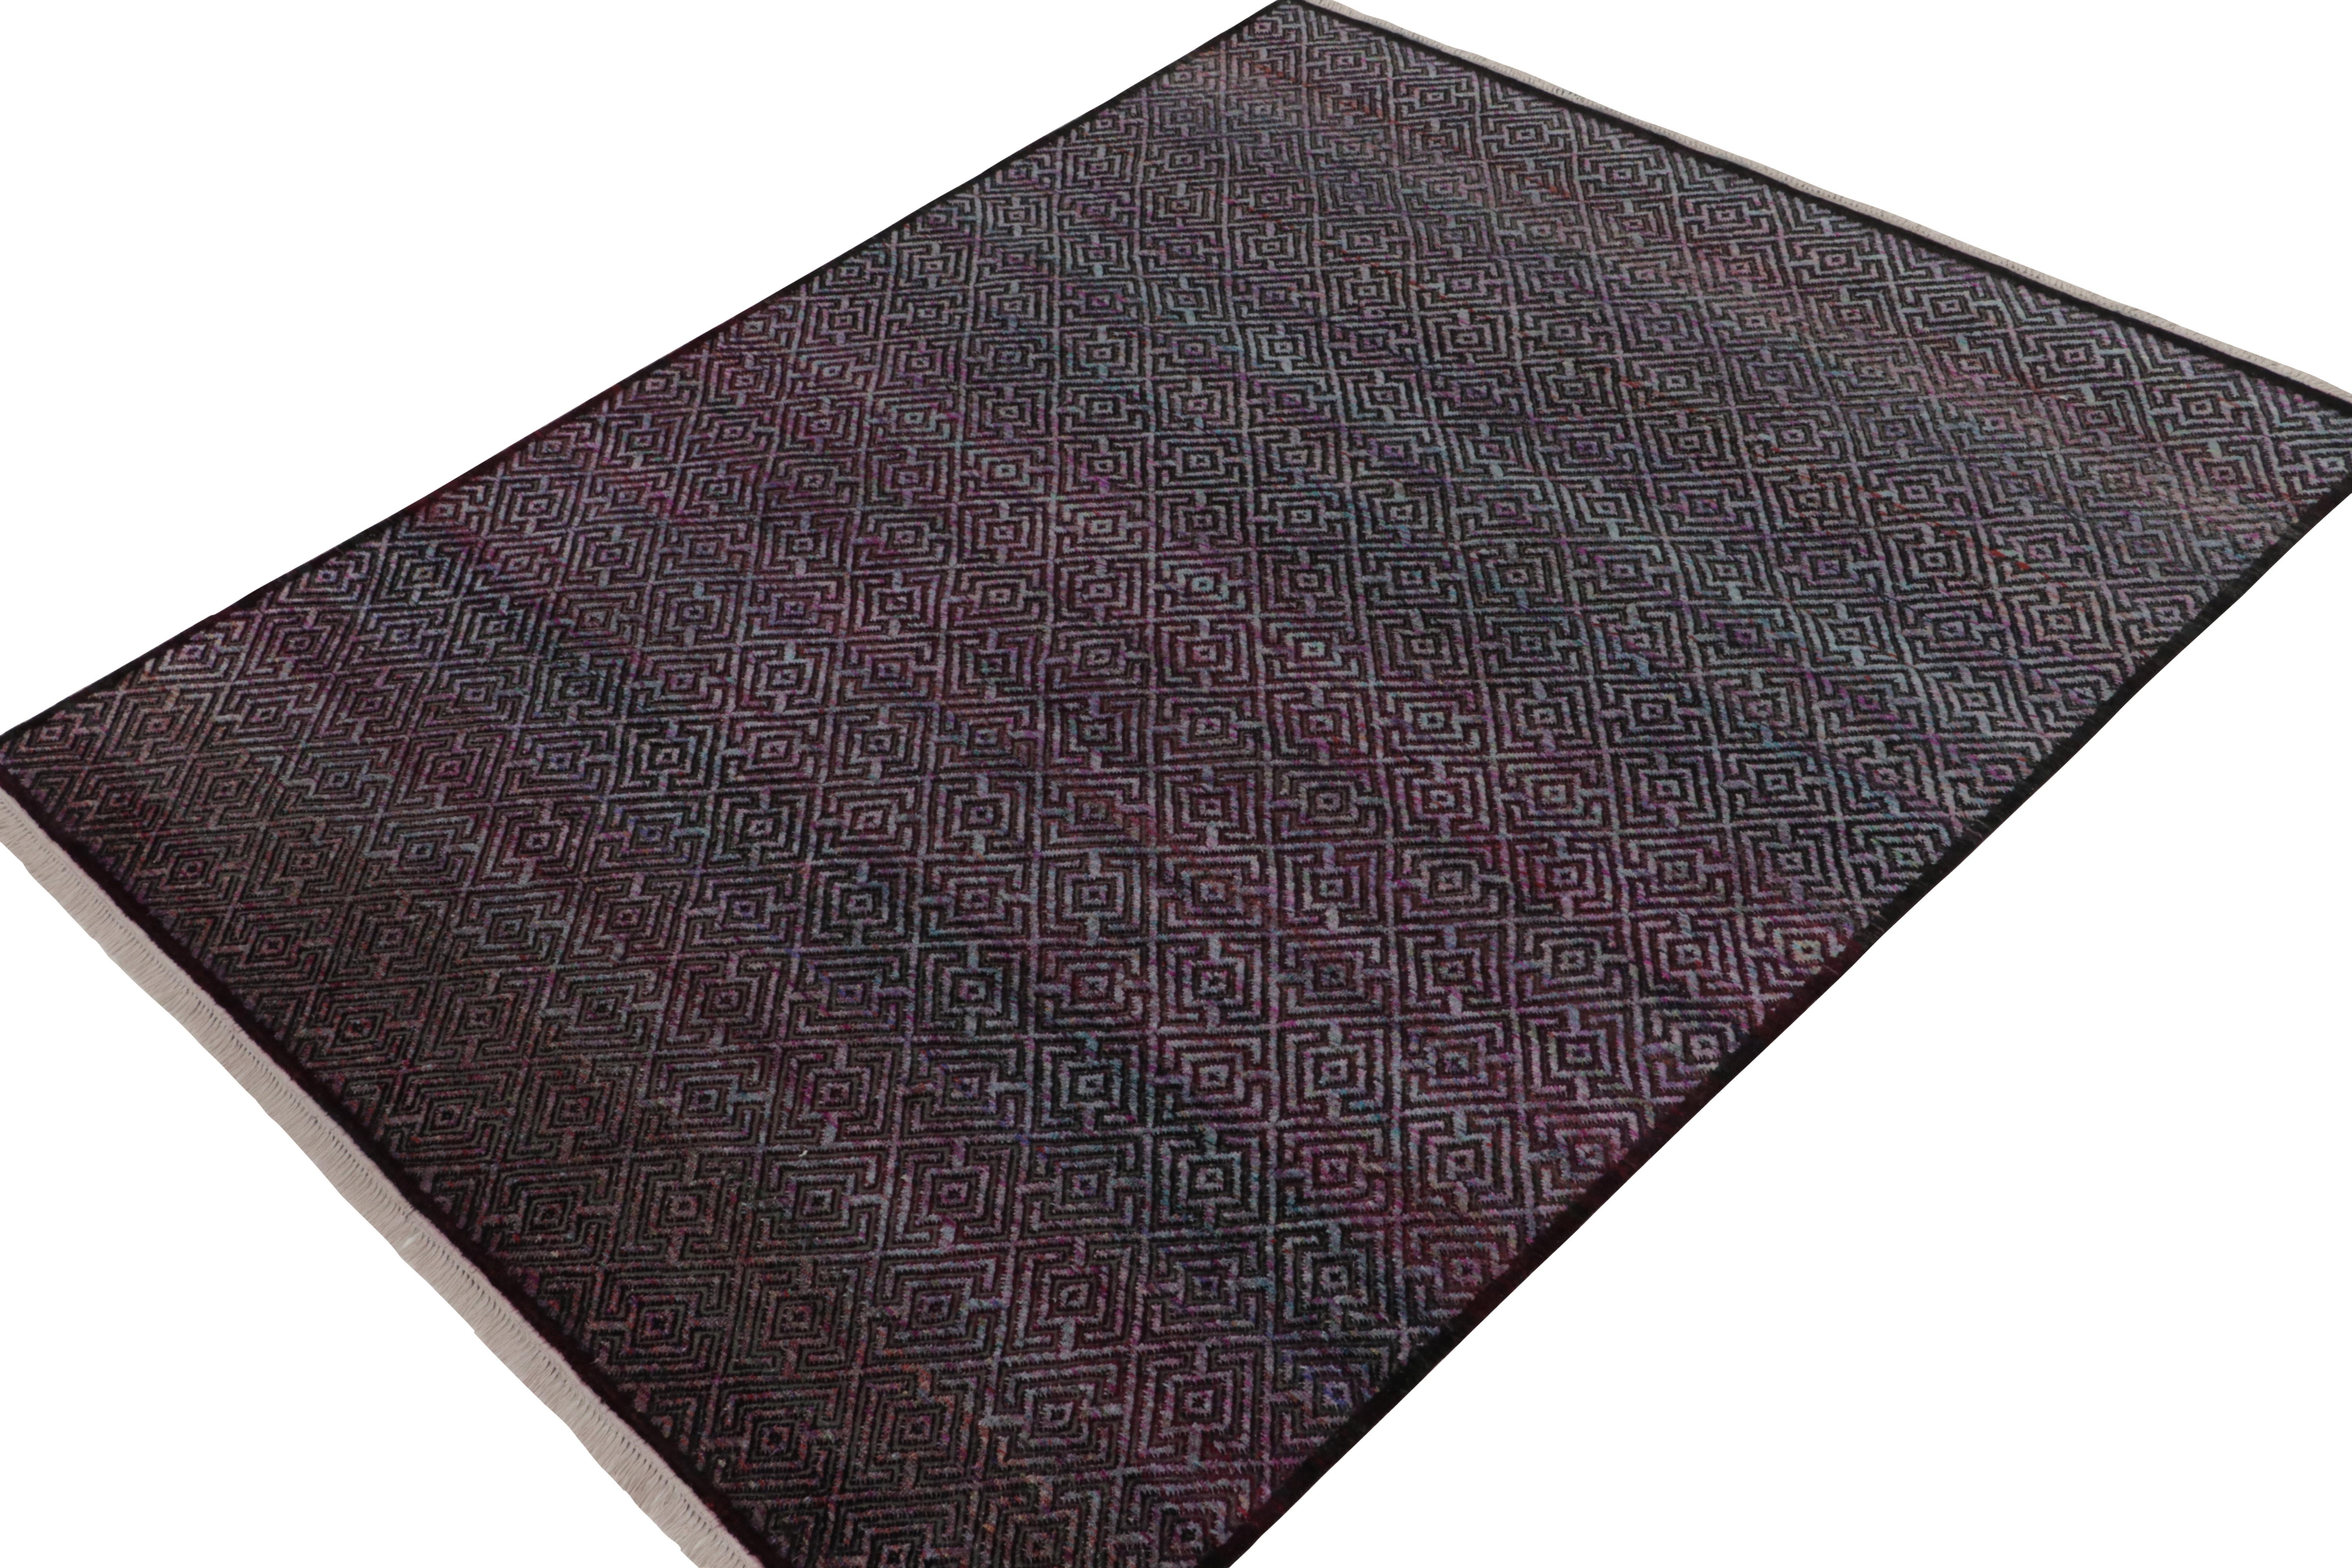 Hand-knotted in a fine blend of wool & silk, an 8x10 contemporary rug from our New & Modern selections. Enjoying a mesmeric blue and purple pattern of subtle textural intricacy and gracious scale. Marking a harmonious union of unique colorways &